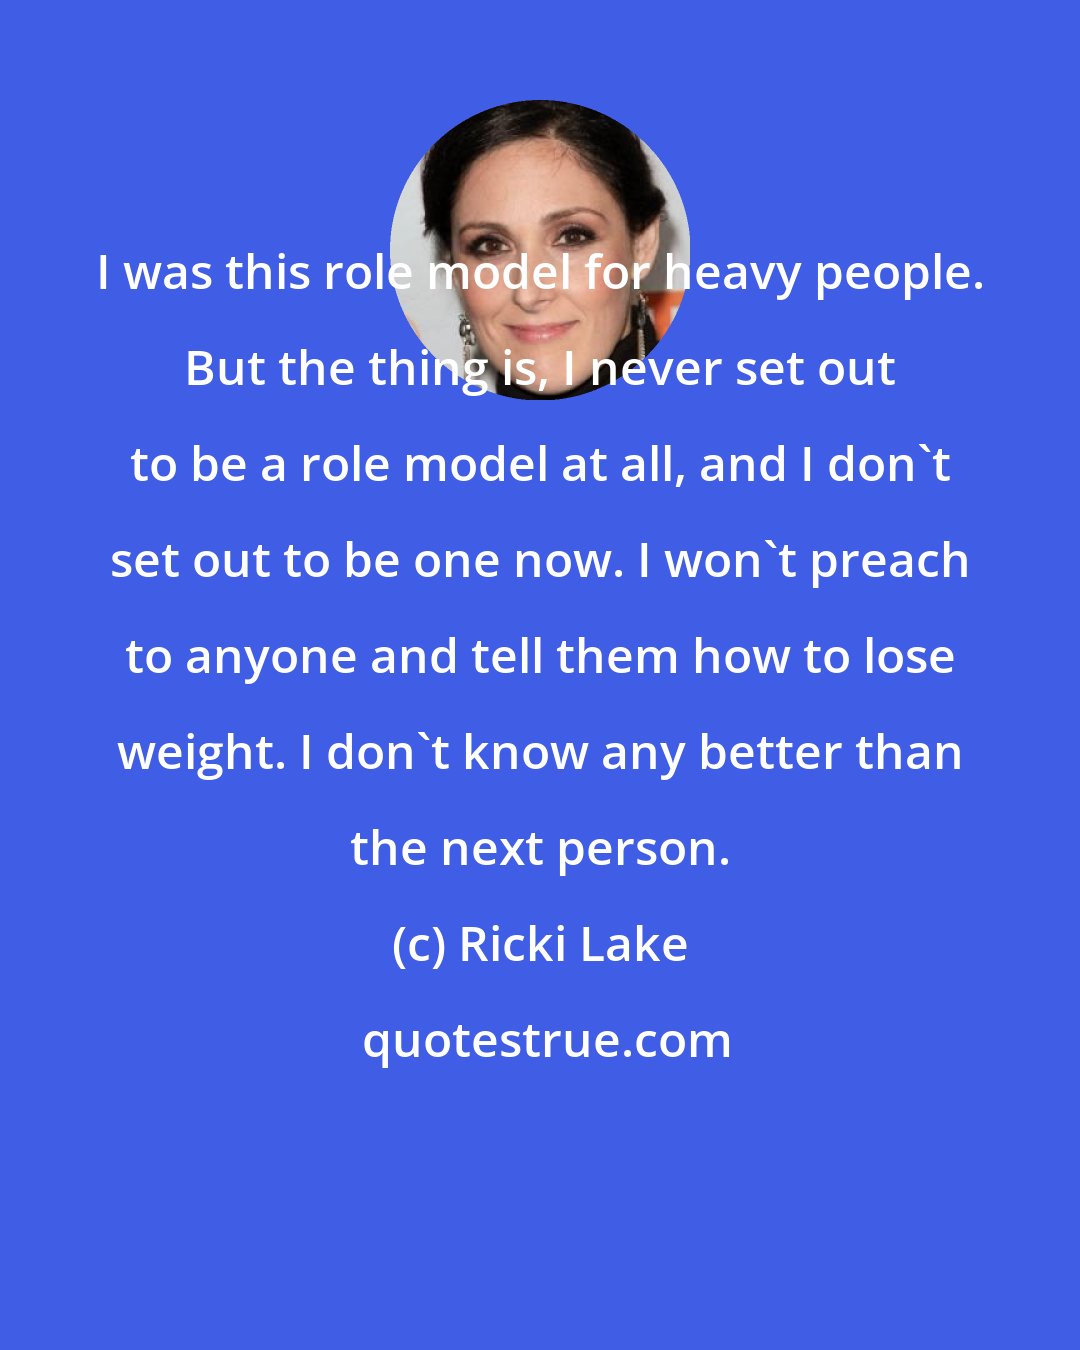 Ricki Lake: I was this role model for heavy people. But the thing is, I never set out to be a role model at all, and I don't set out to be one now. I won't preach to anyone and tell them how to lose weight. I don't know any better than the next person.